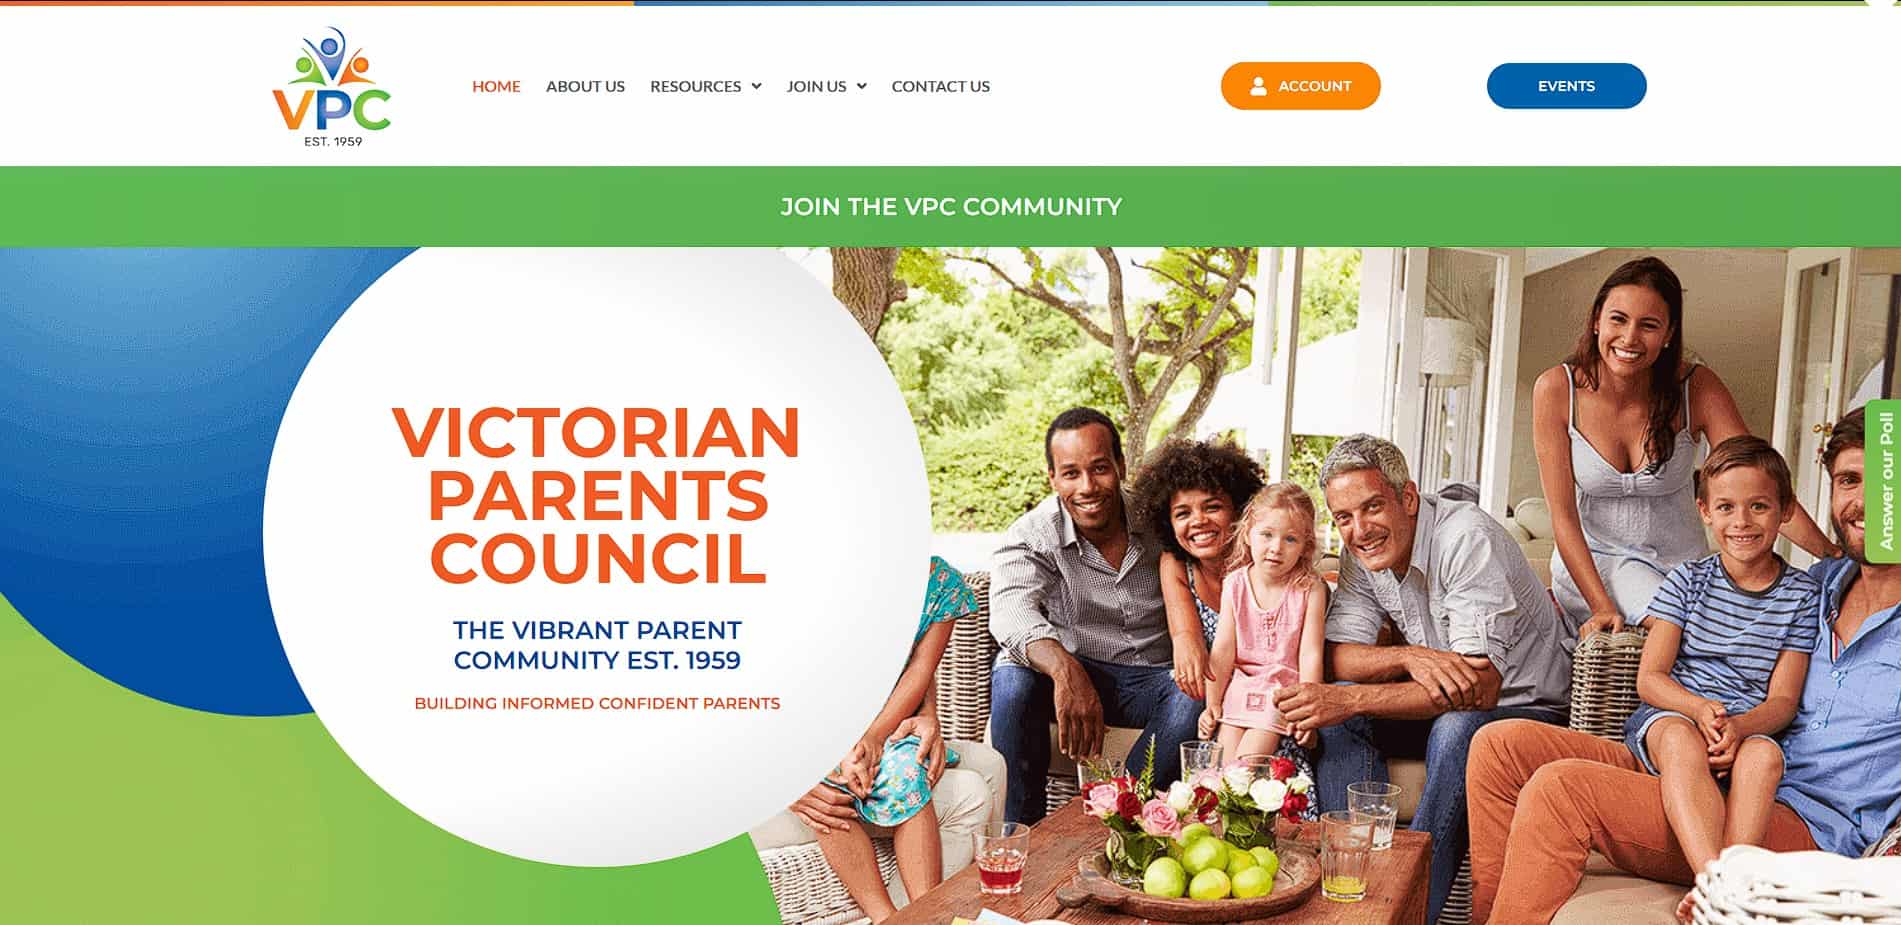 VPC Website Preview - VPC E-NEWS June 2020 during COVID-19